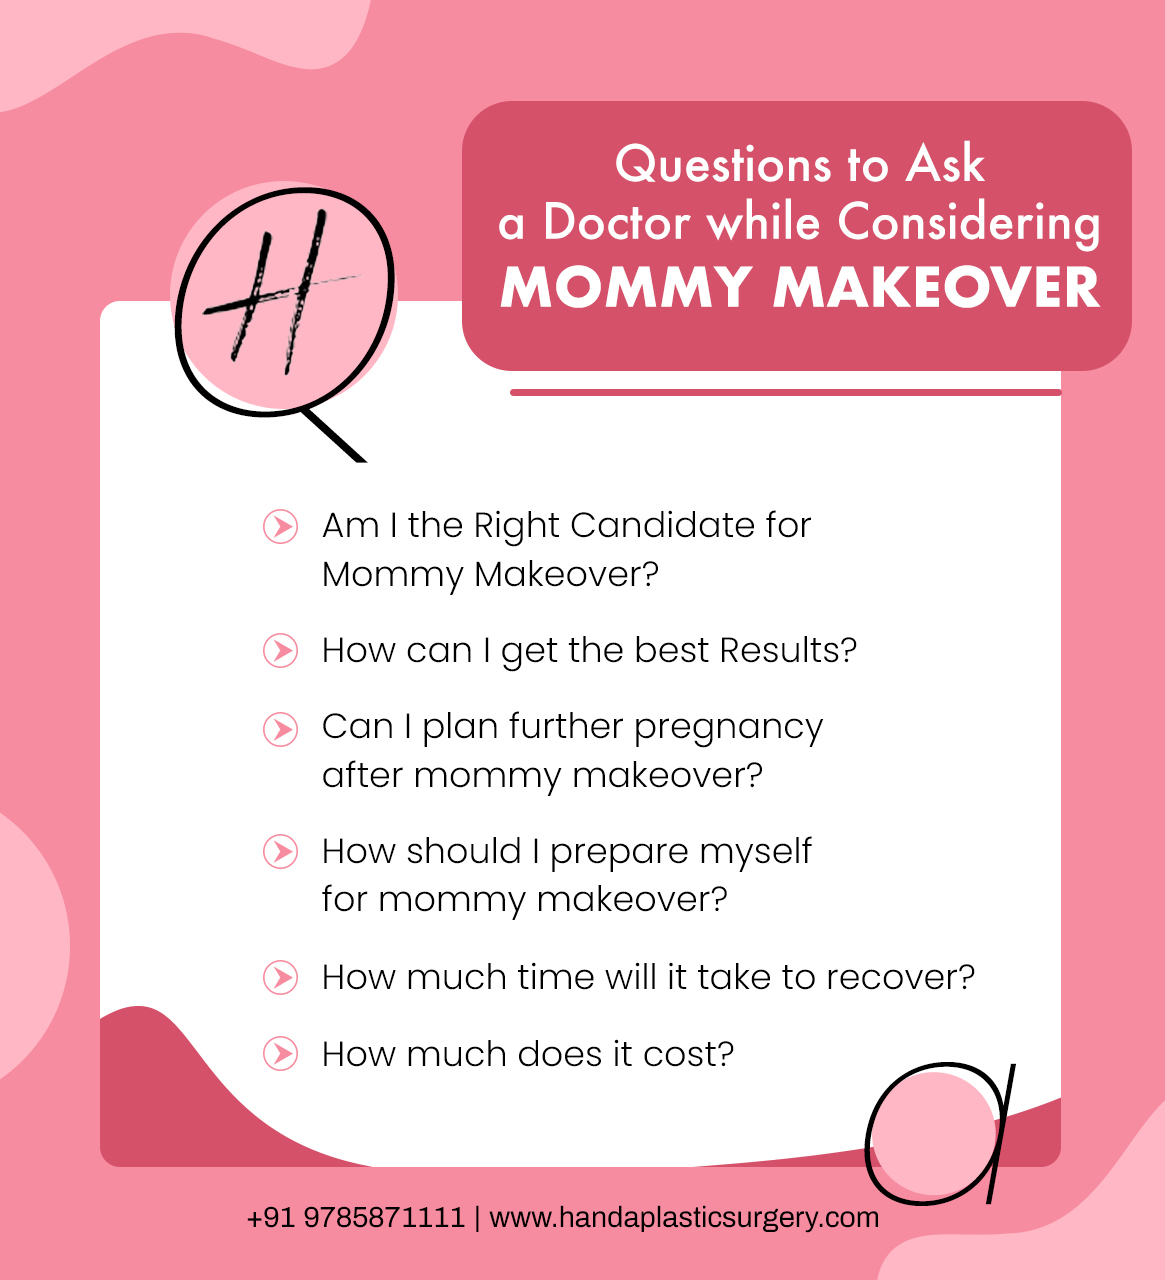 Considering-A-Mommy-Makeover-Info